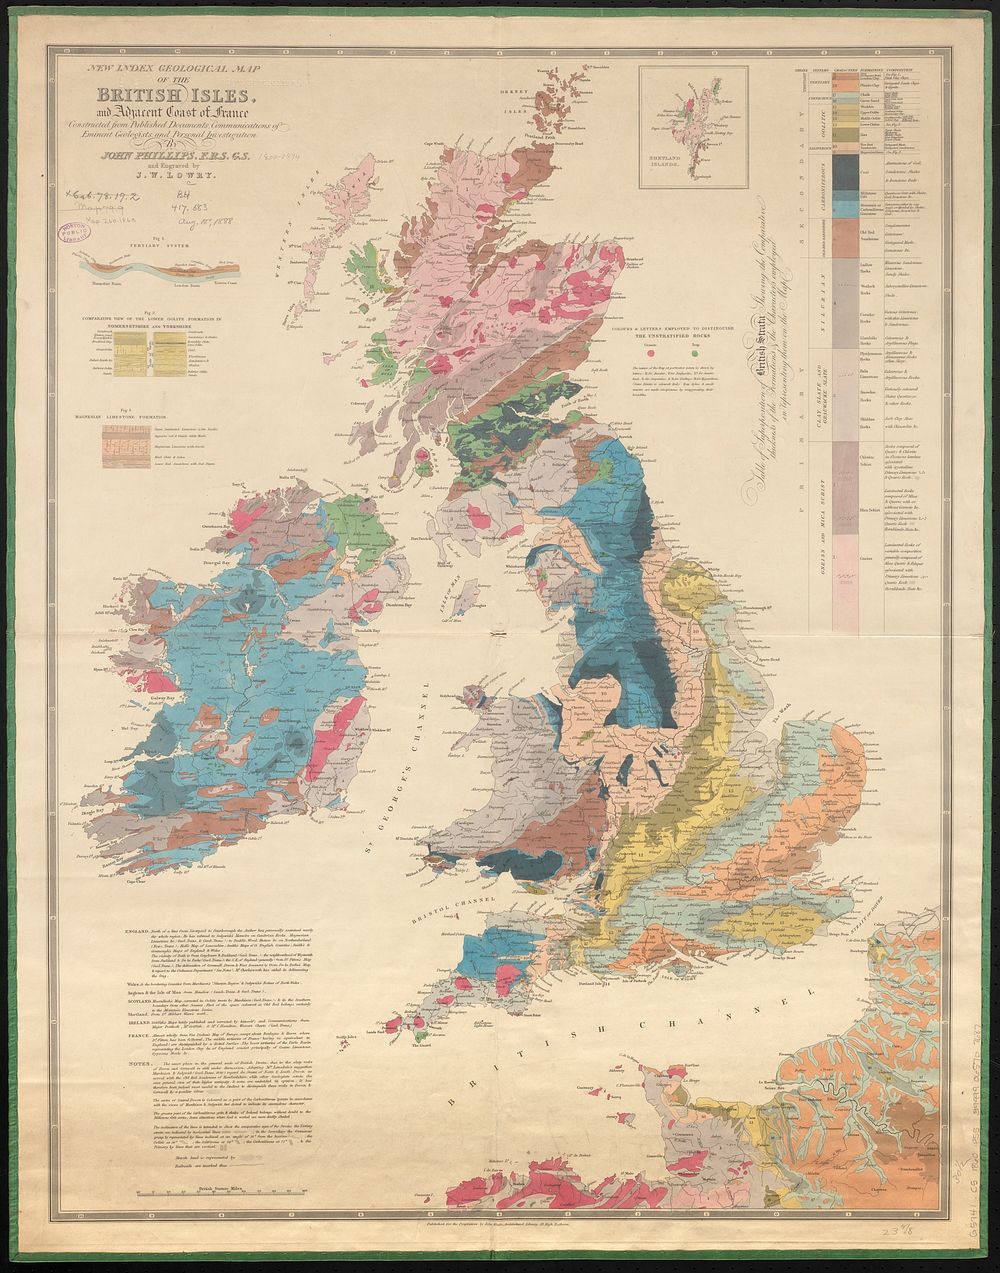             New index geological map of the British Isles, and adjacent coast of France constructed from published…